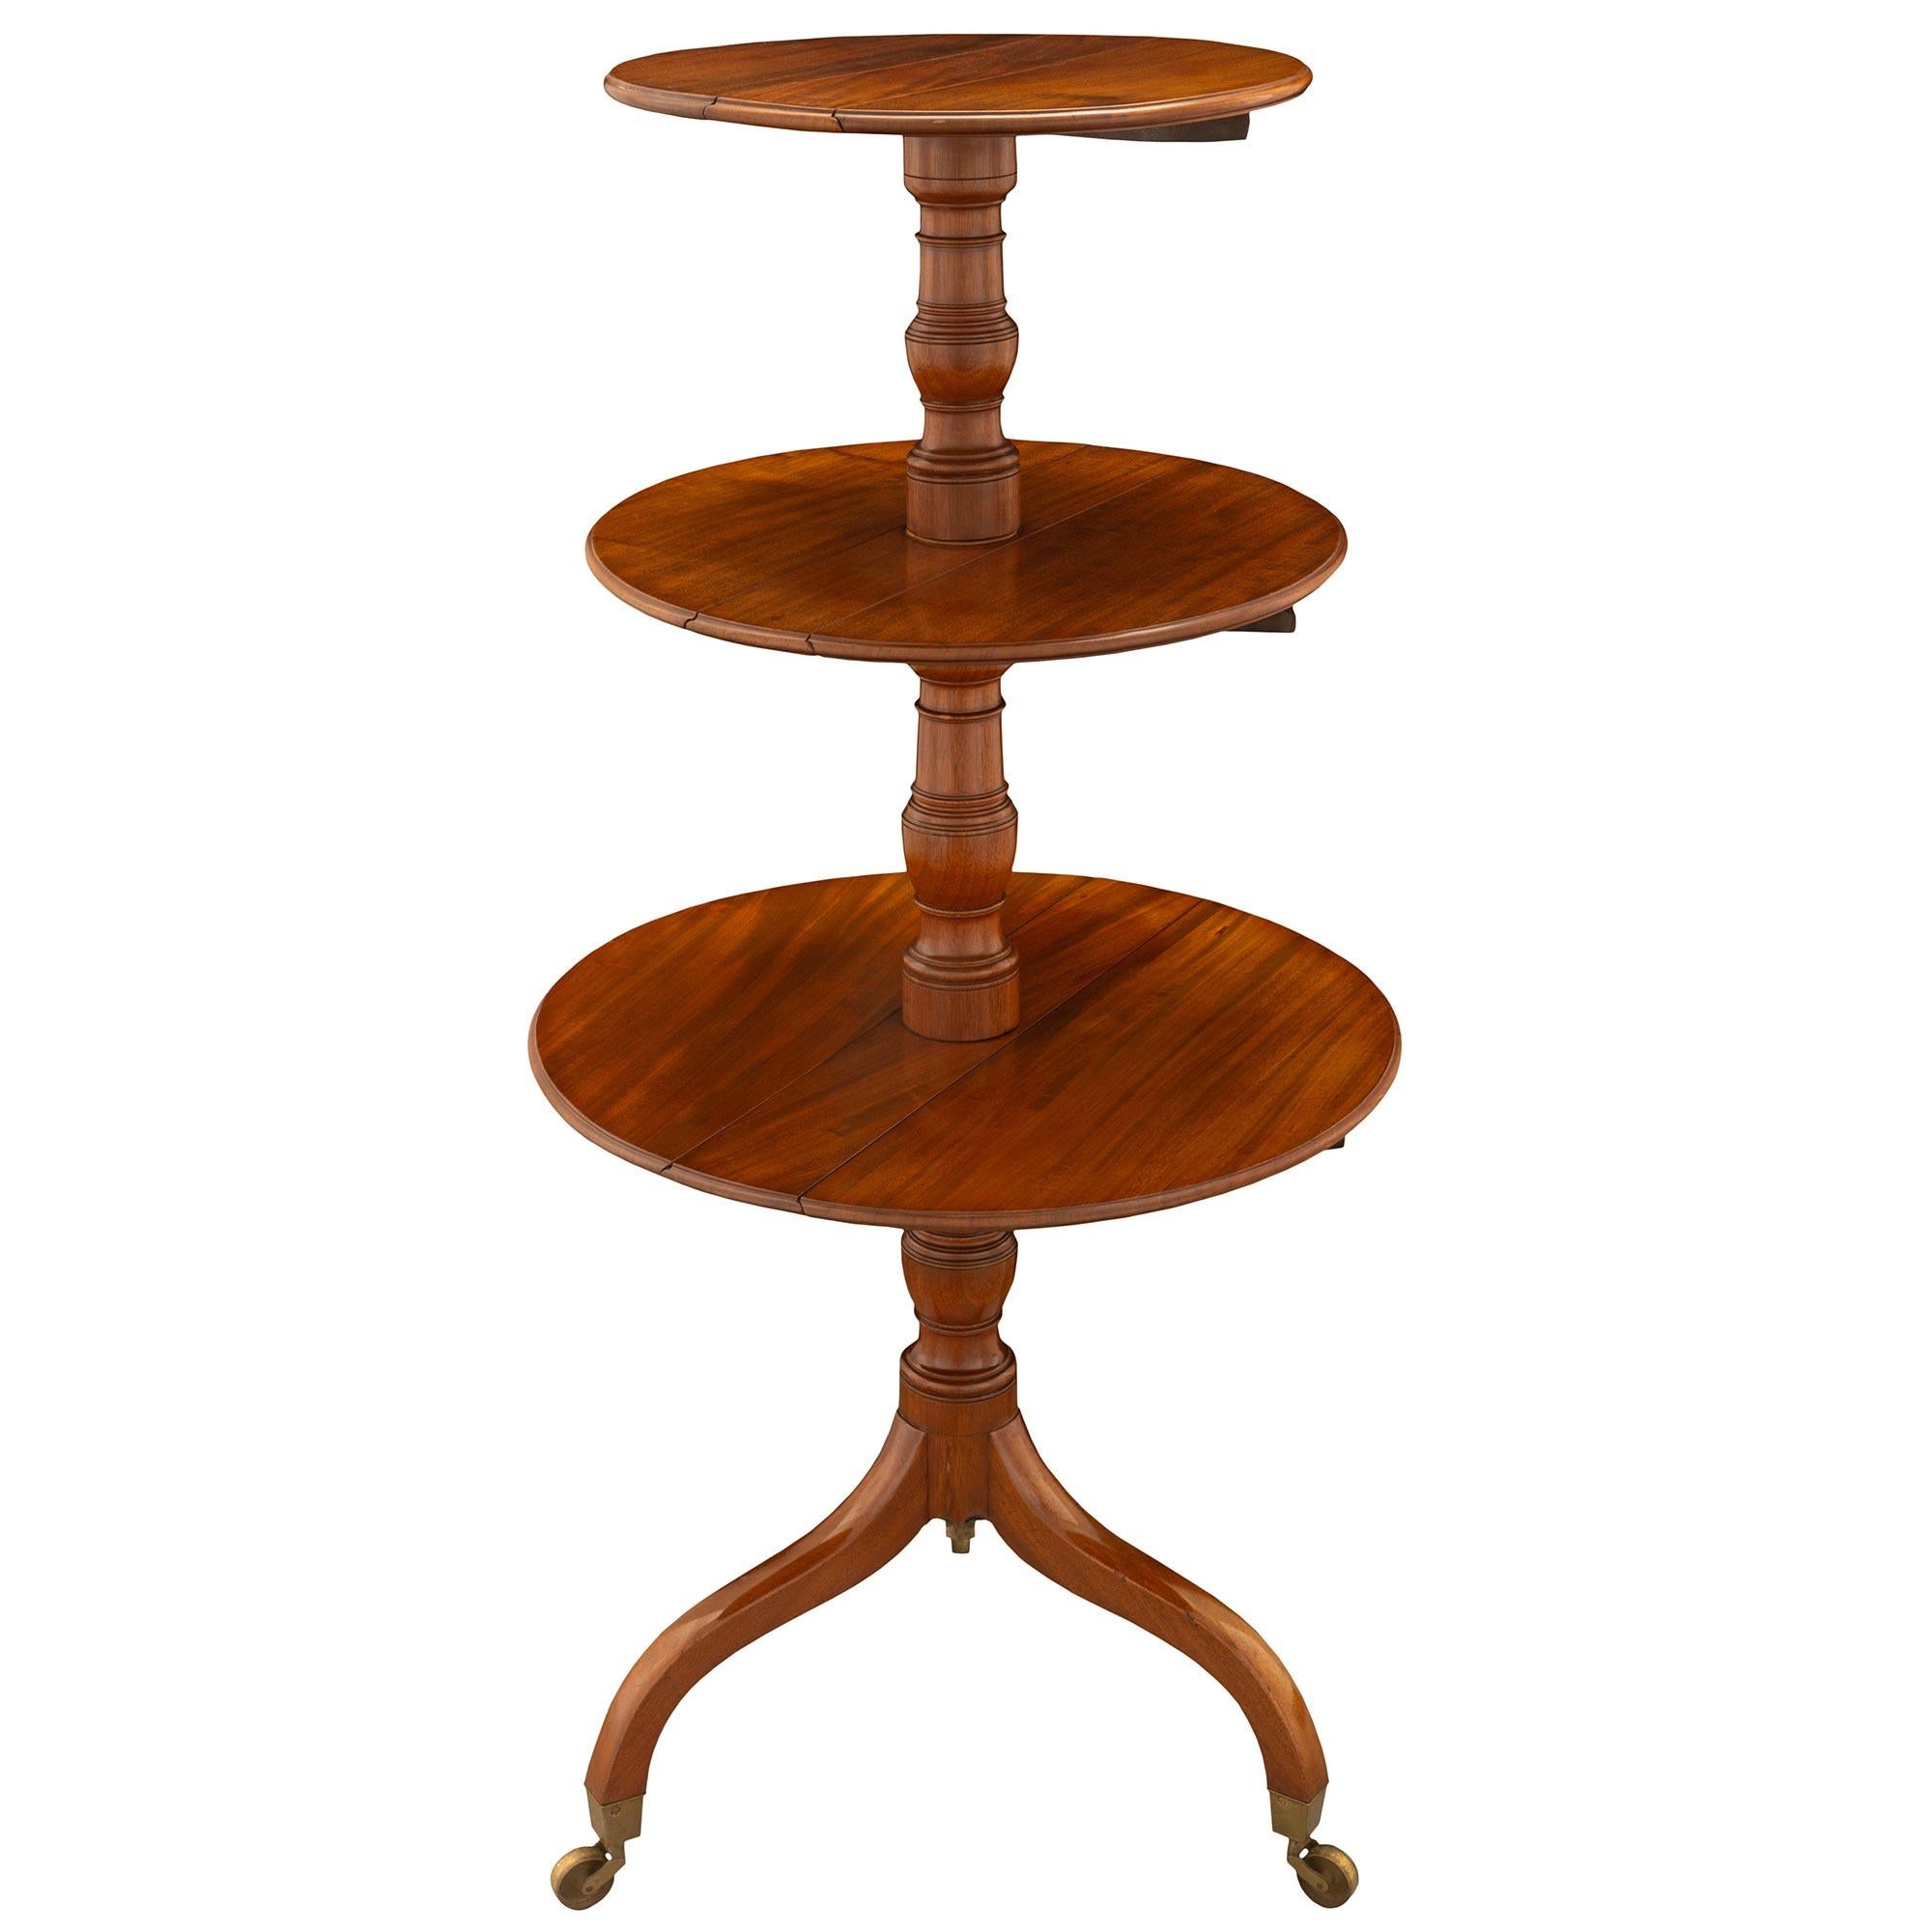 An elegant early 19th century English Regency st. mahogany three-tier serving table. The table often referred to as a 